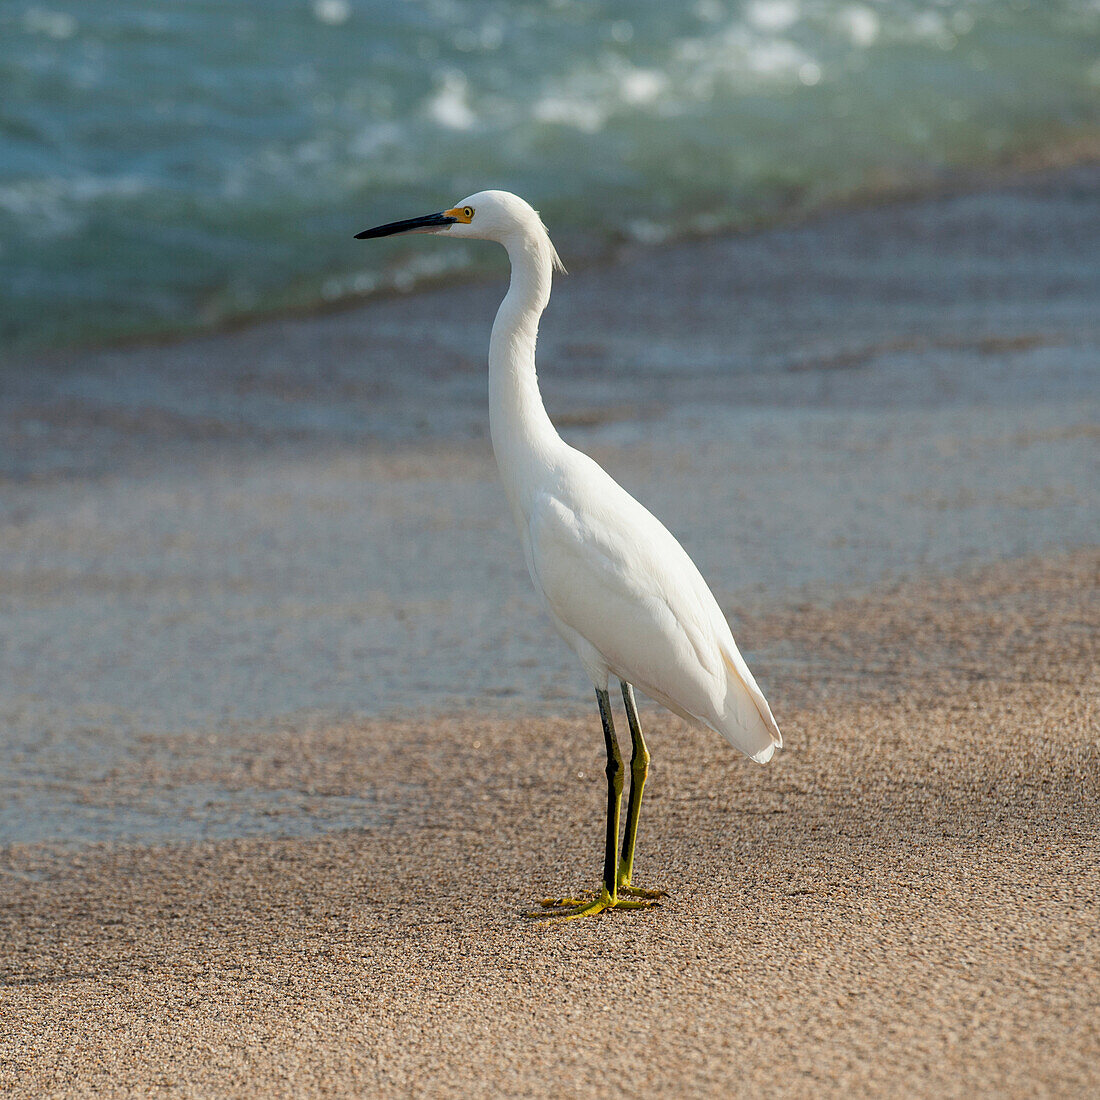 'A White Bird Standing On The Sand At The Water's Edge; Sayulita, Mexico'